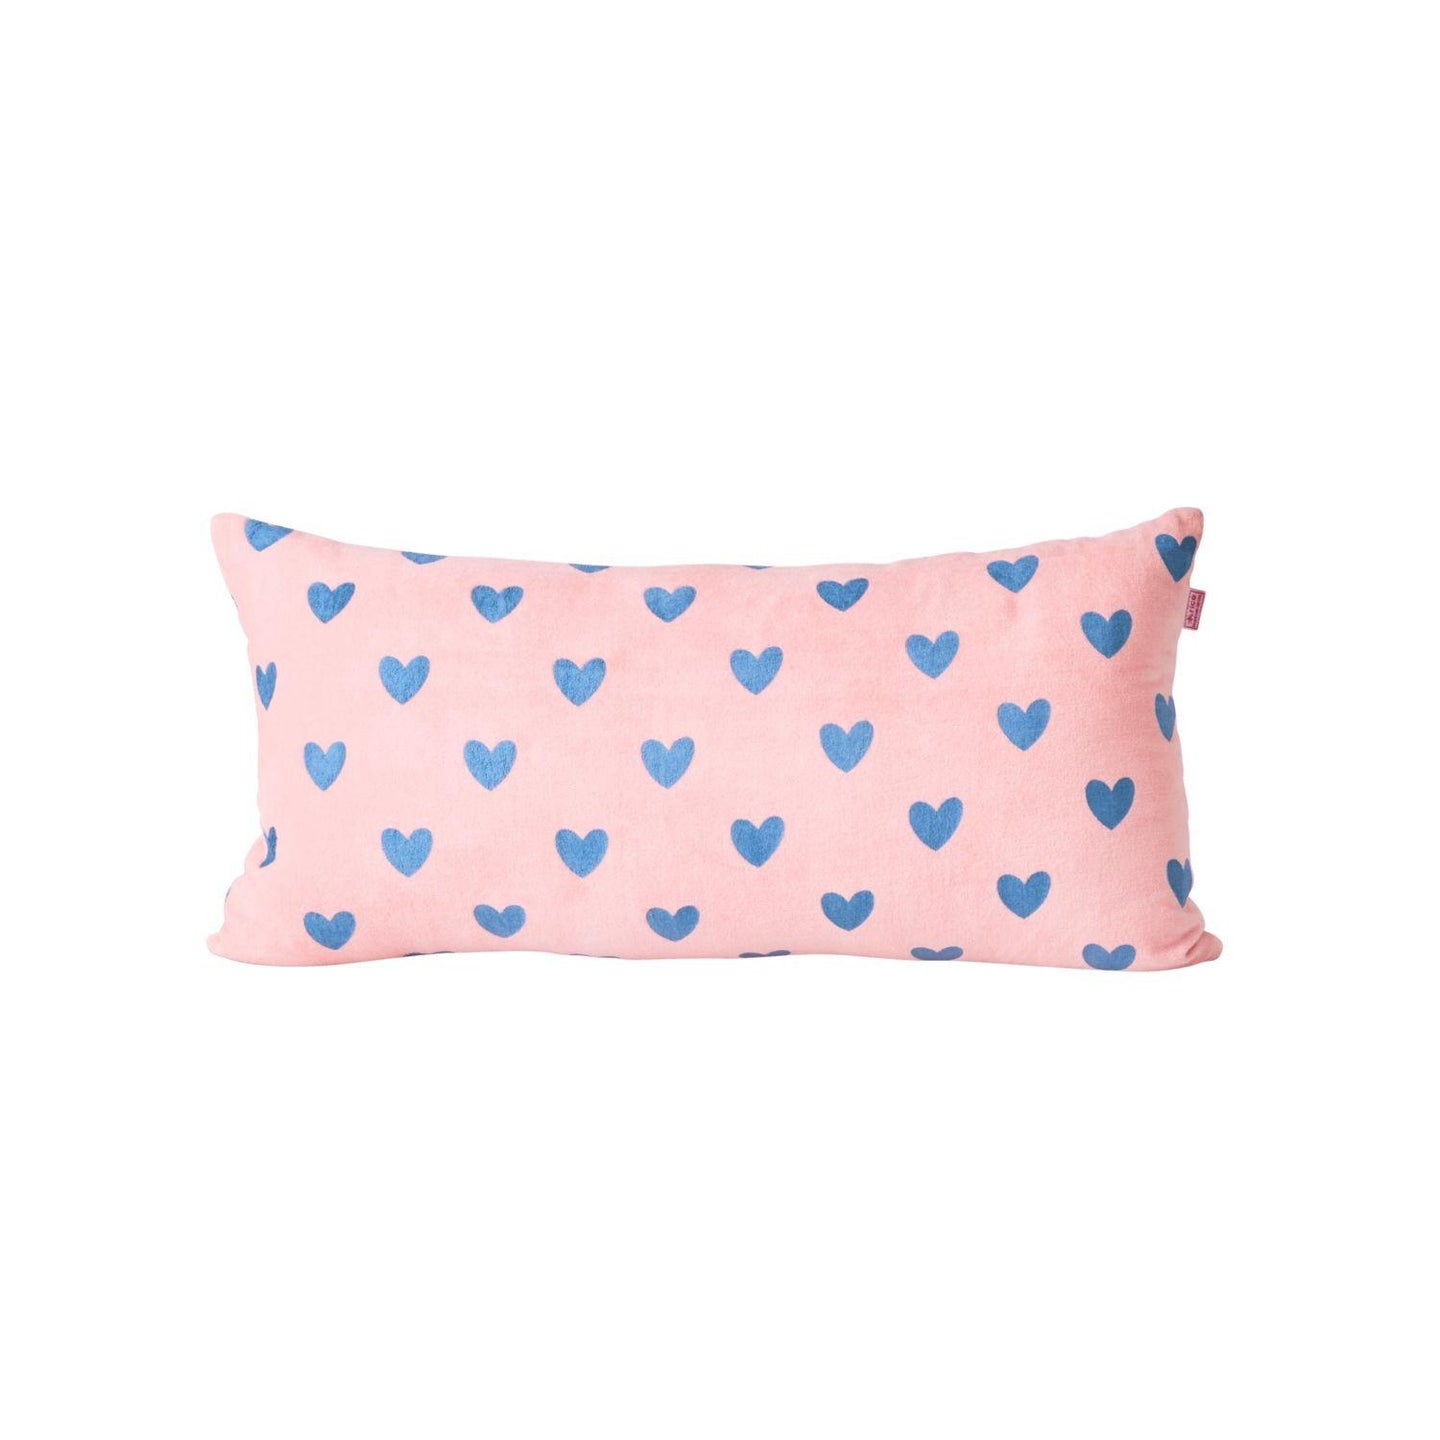 Pink Velvet Cushion with Blue Hearts by RICE - Mandi at Home